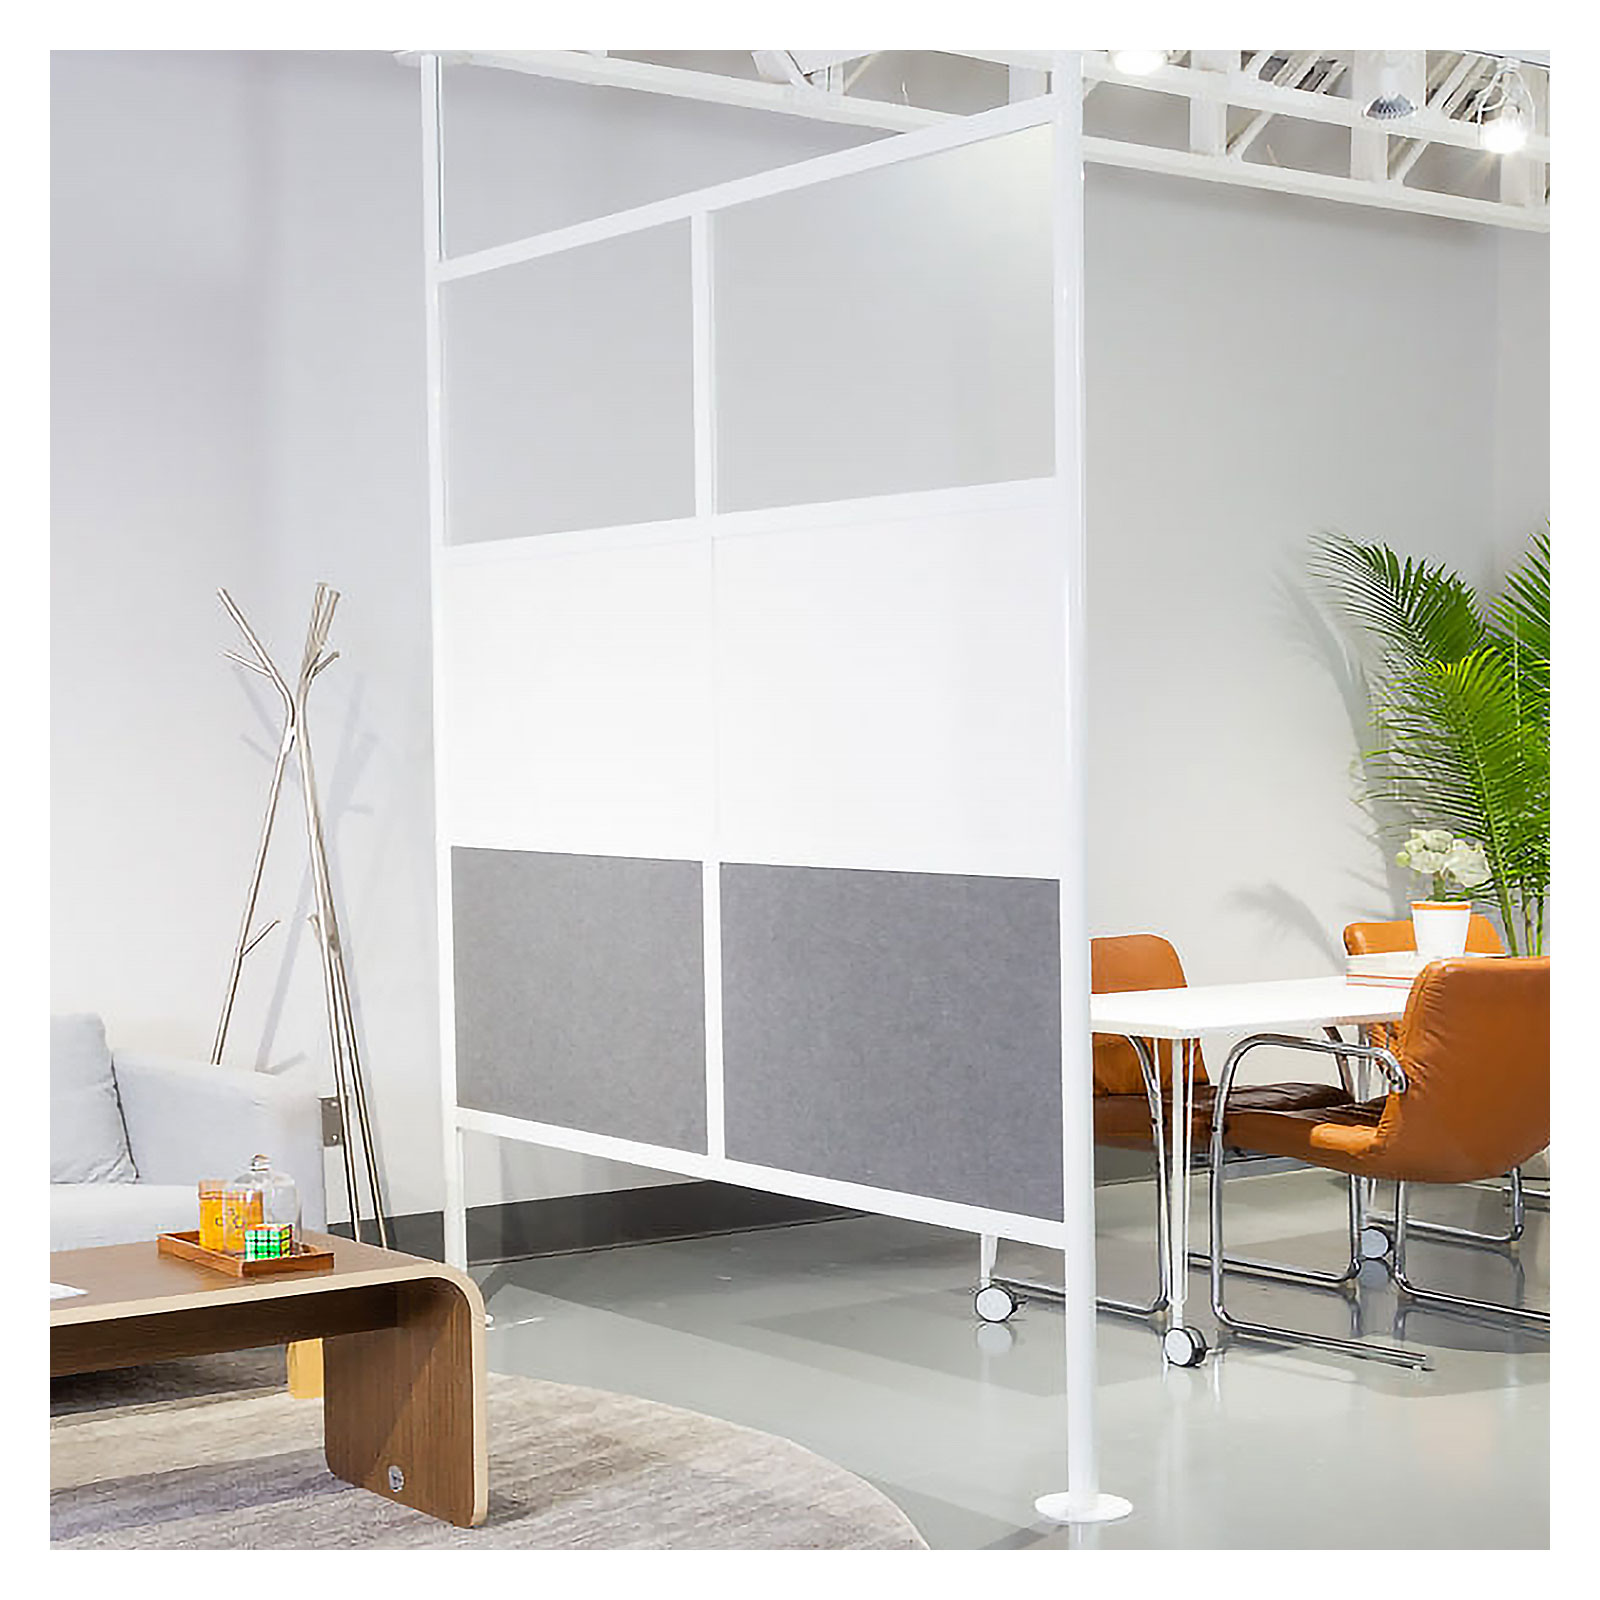 While single Framewall room dividers can be ordered, multiple Framewalls can be linked together to further create space!